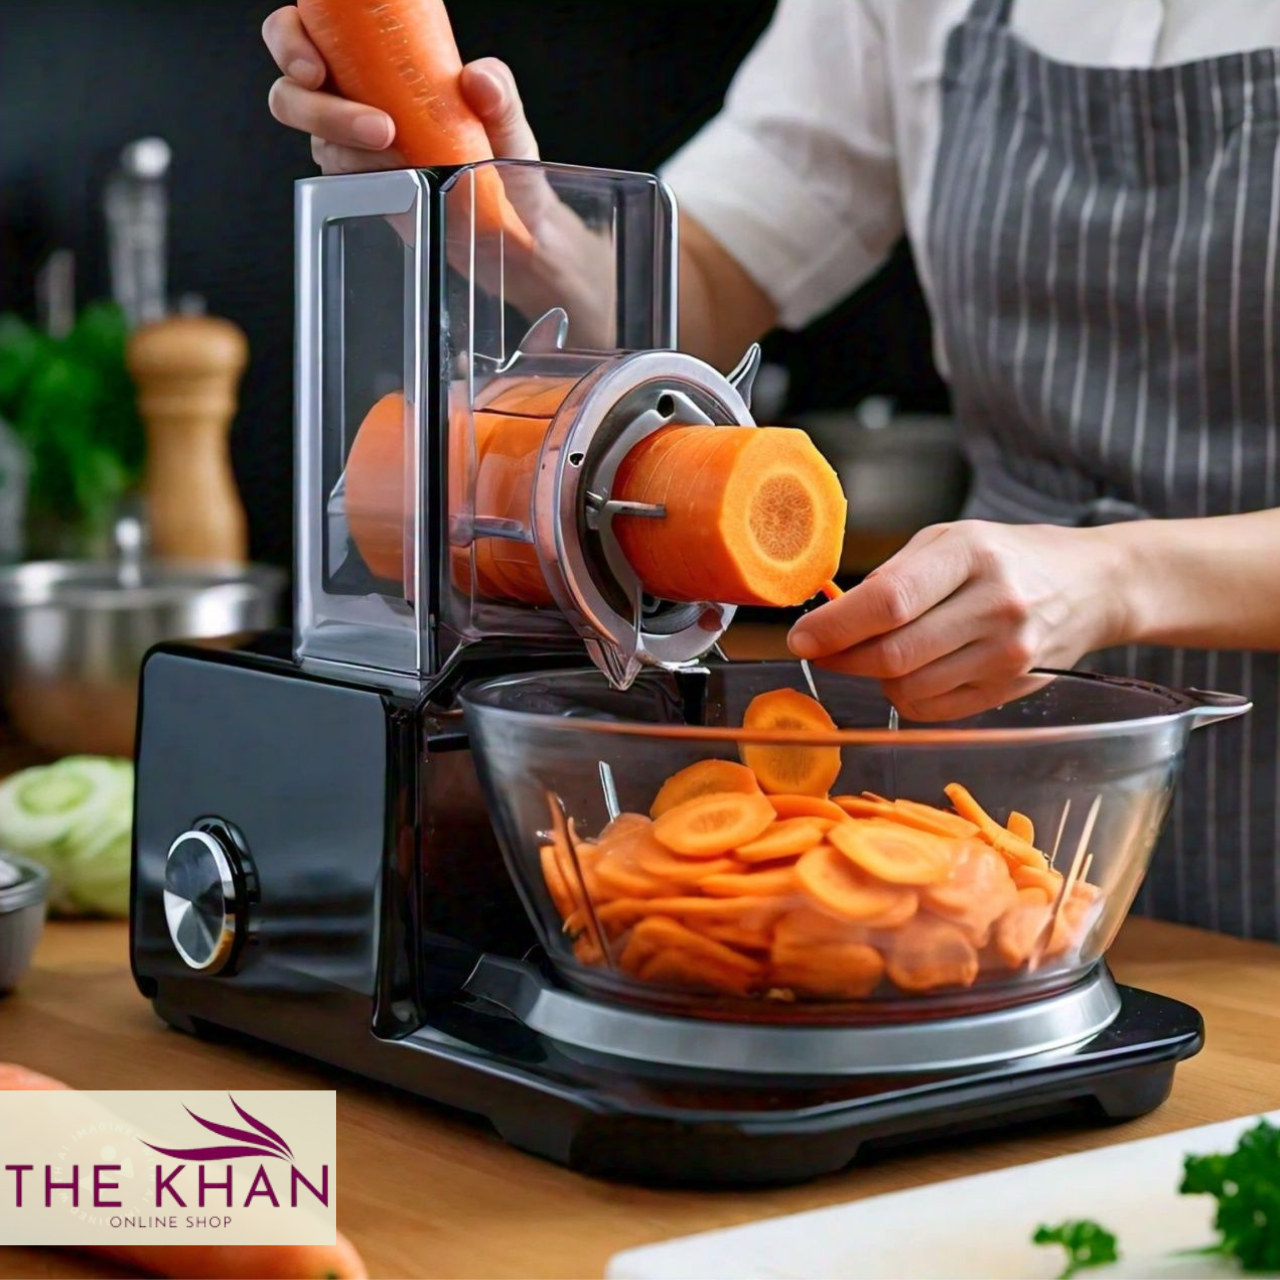 How to Use Your Food Processor for Perfectly Sliced Vegetables